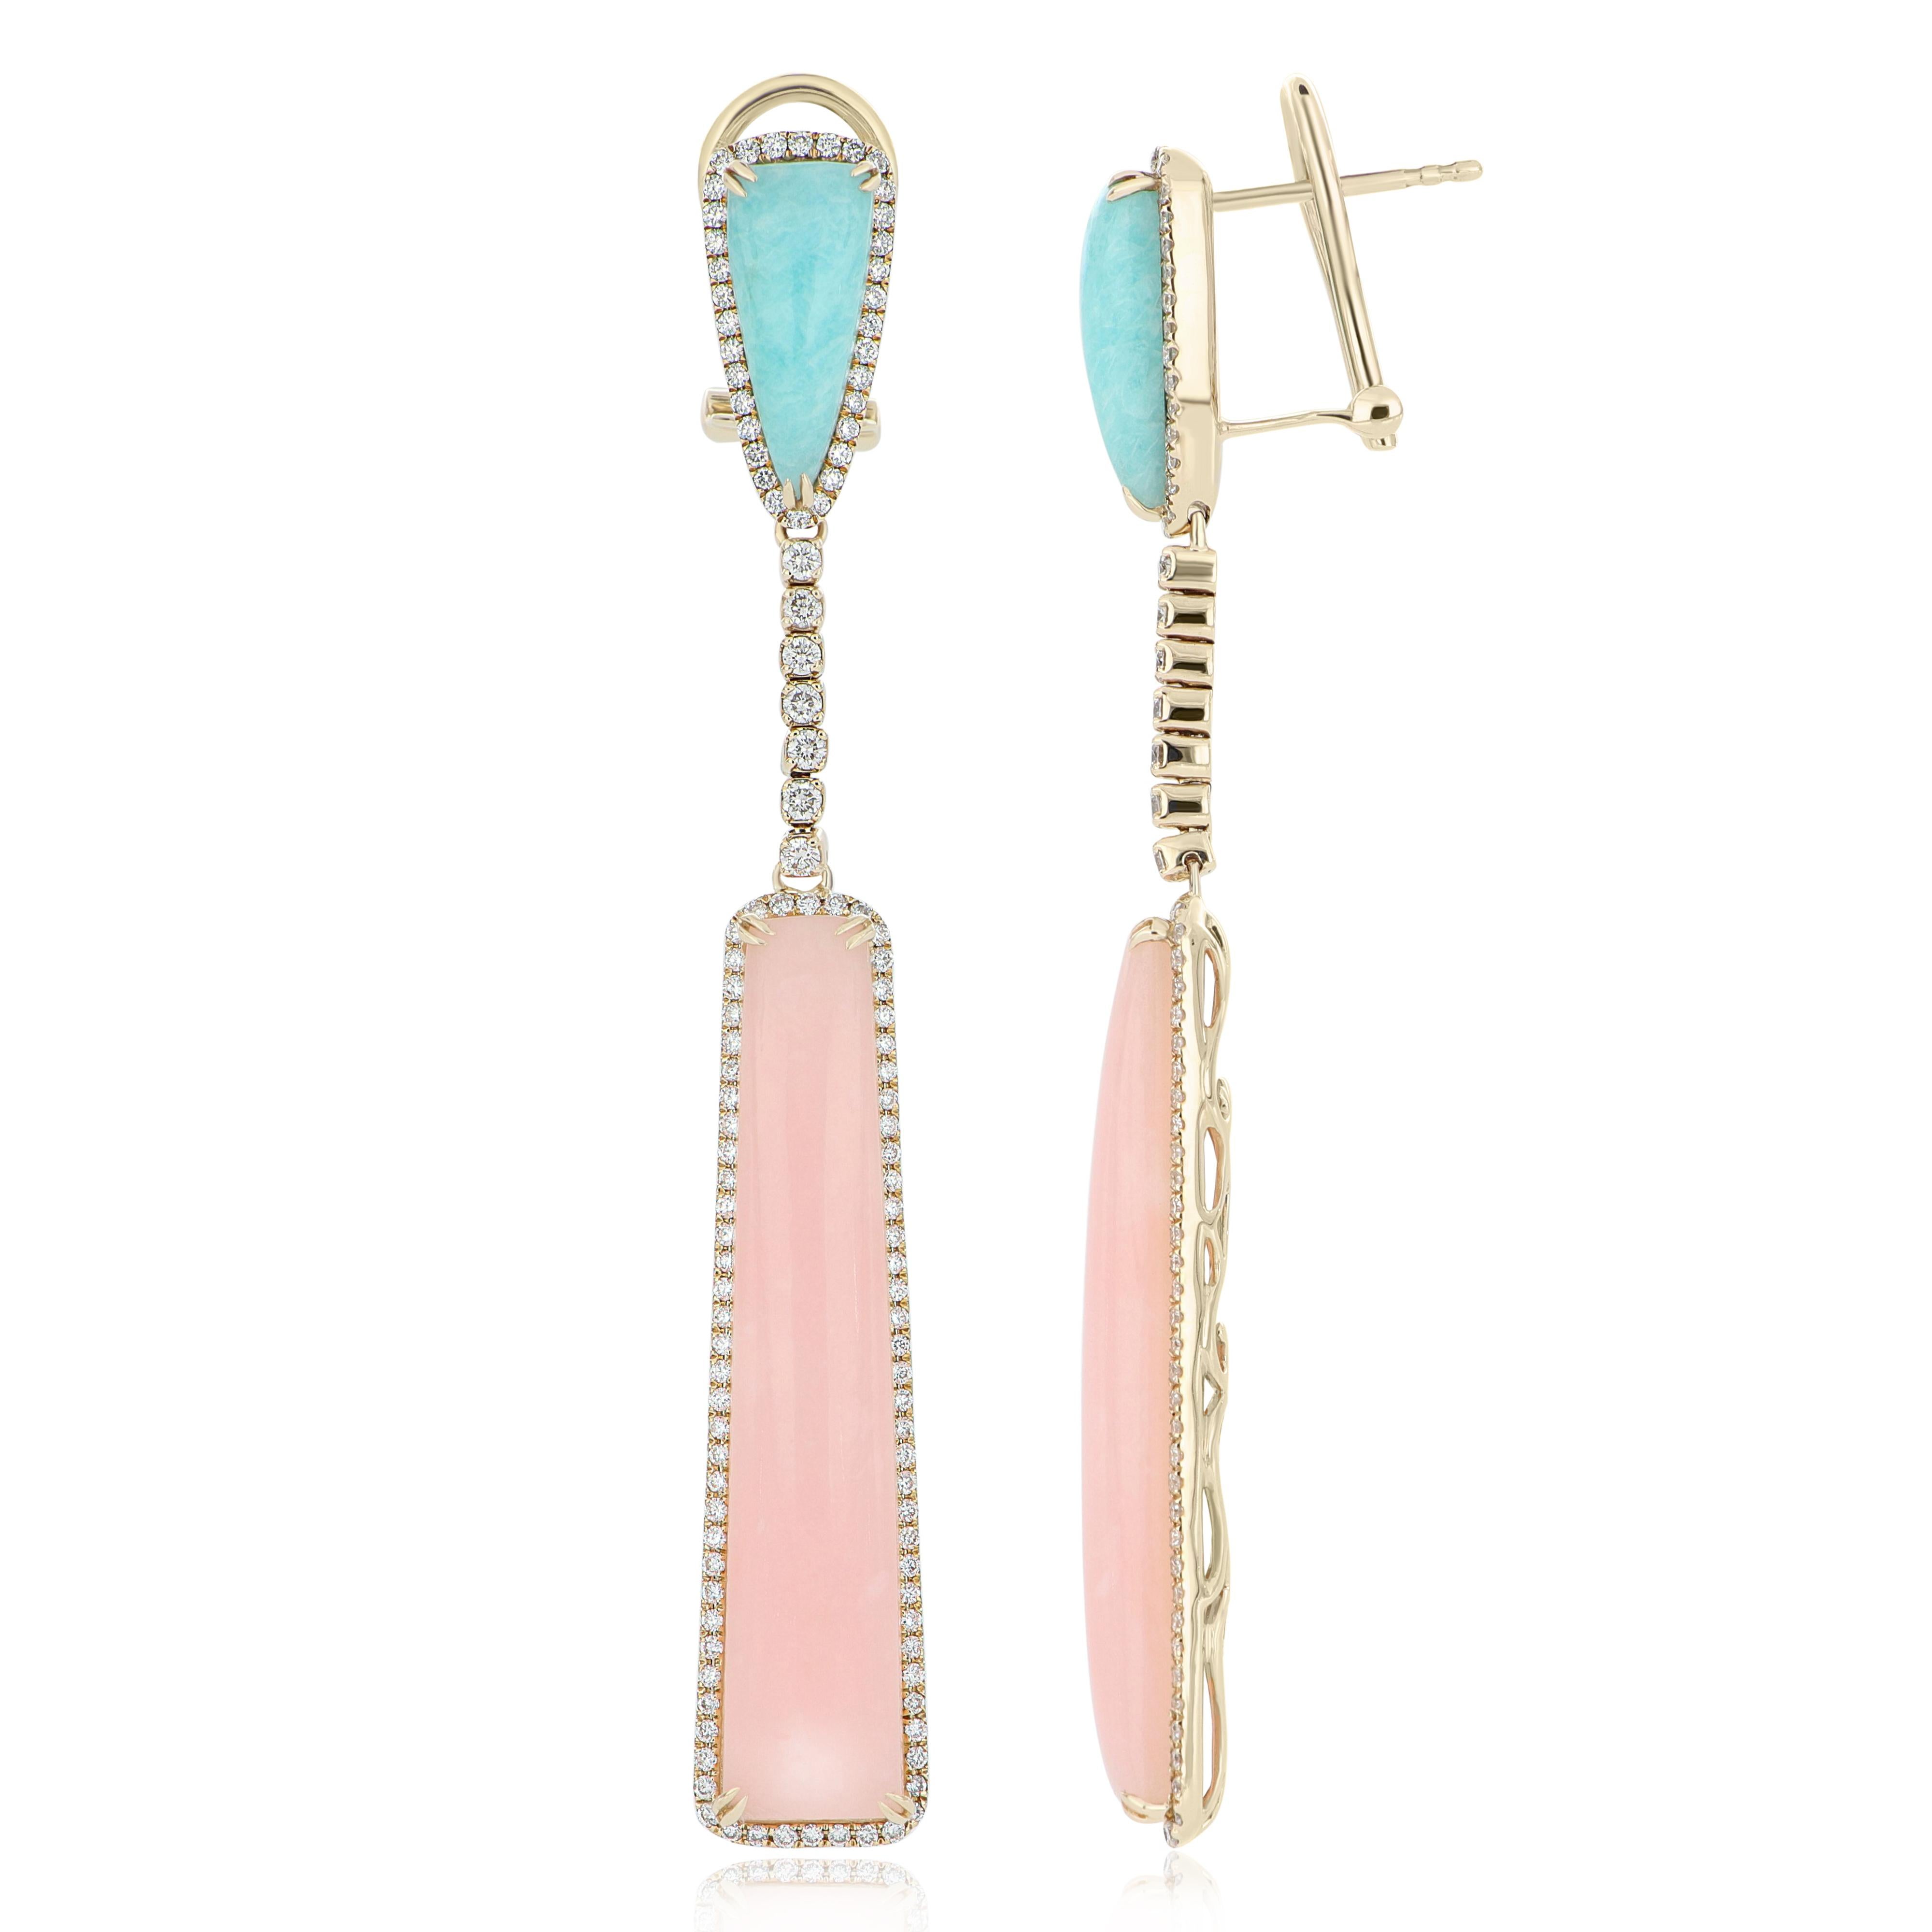 Elegant and exquisitely detailed 14 Karat Yellow Gold Earrings, adorned with 14.15 Cts Cab Trillion Shape Pink Opal, 3.36 Cts. Amazonite and Diamonds, weighing approx. 1.0 CT  Beautifully Hand crafted in 14 Karat Yellow Gold.

Stone Detail:
Pink